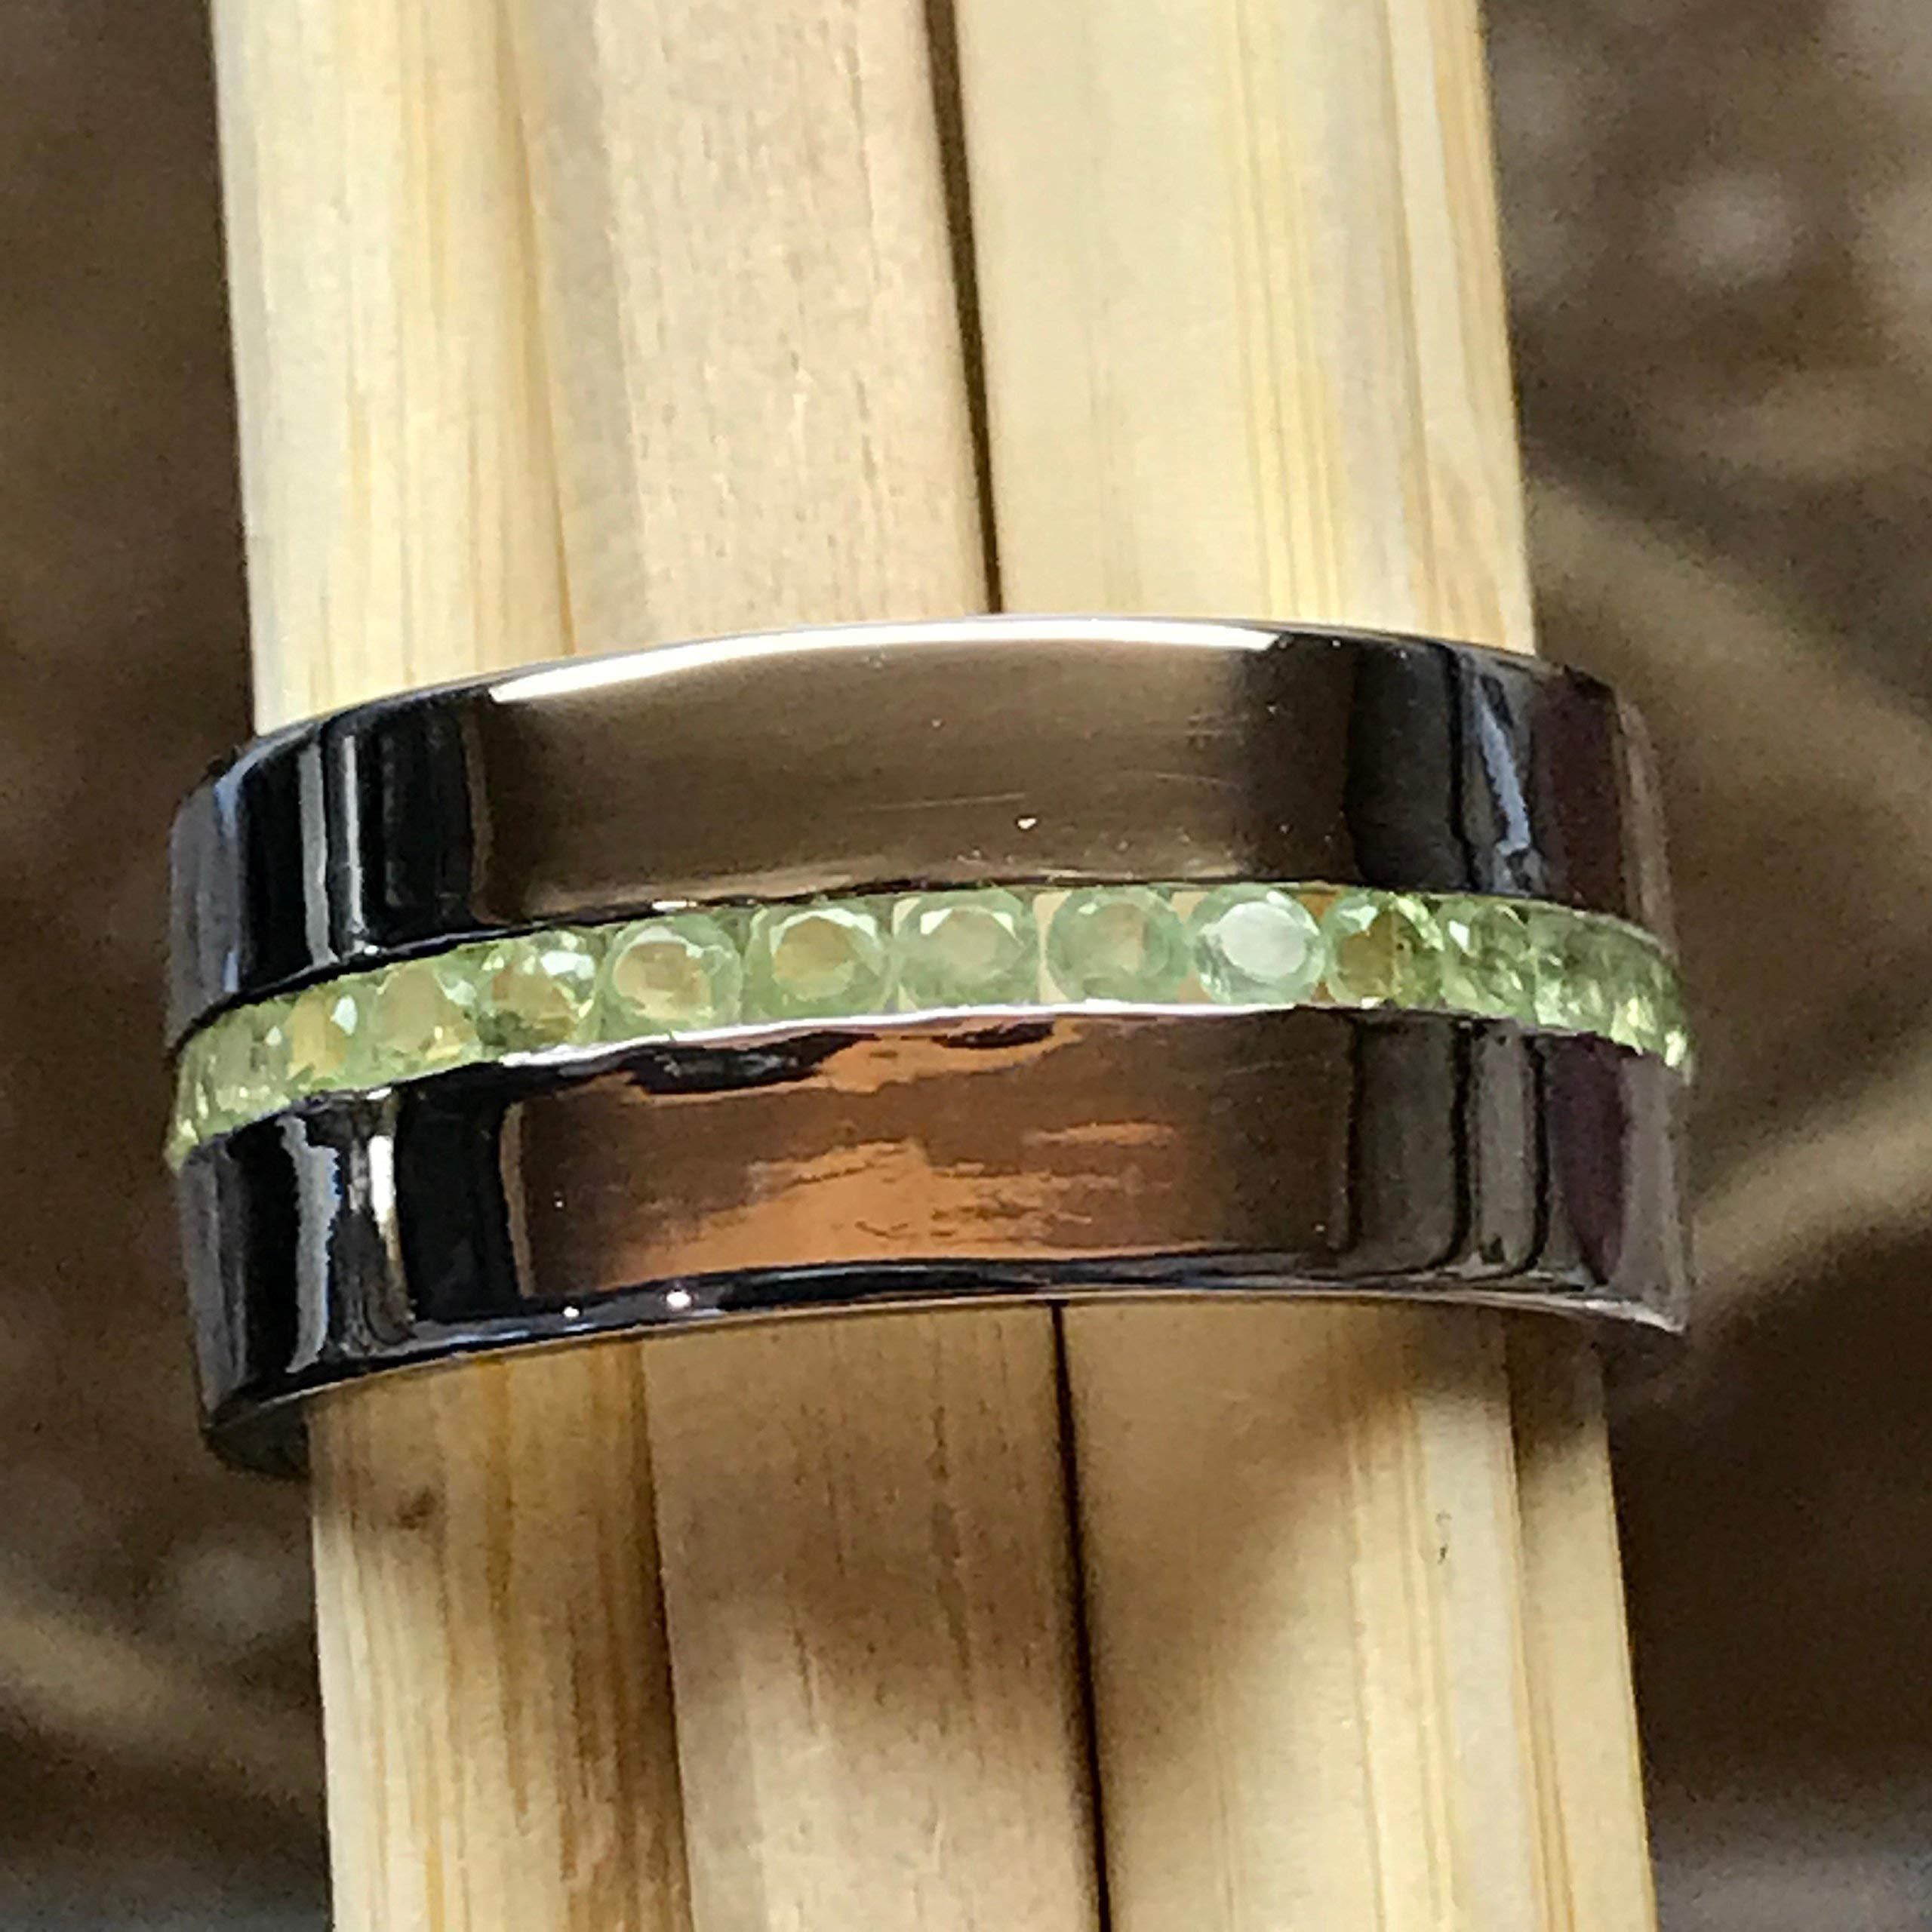 Genuine 2ct Green Peridot 925 Solid Sterling Silver Men's Ring Size 7, 8, 9, 10, 11 - Natural Rocks by Kala